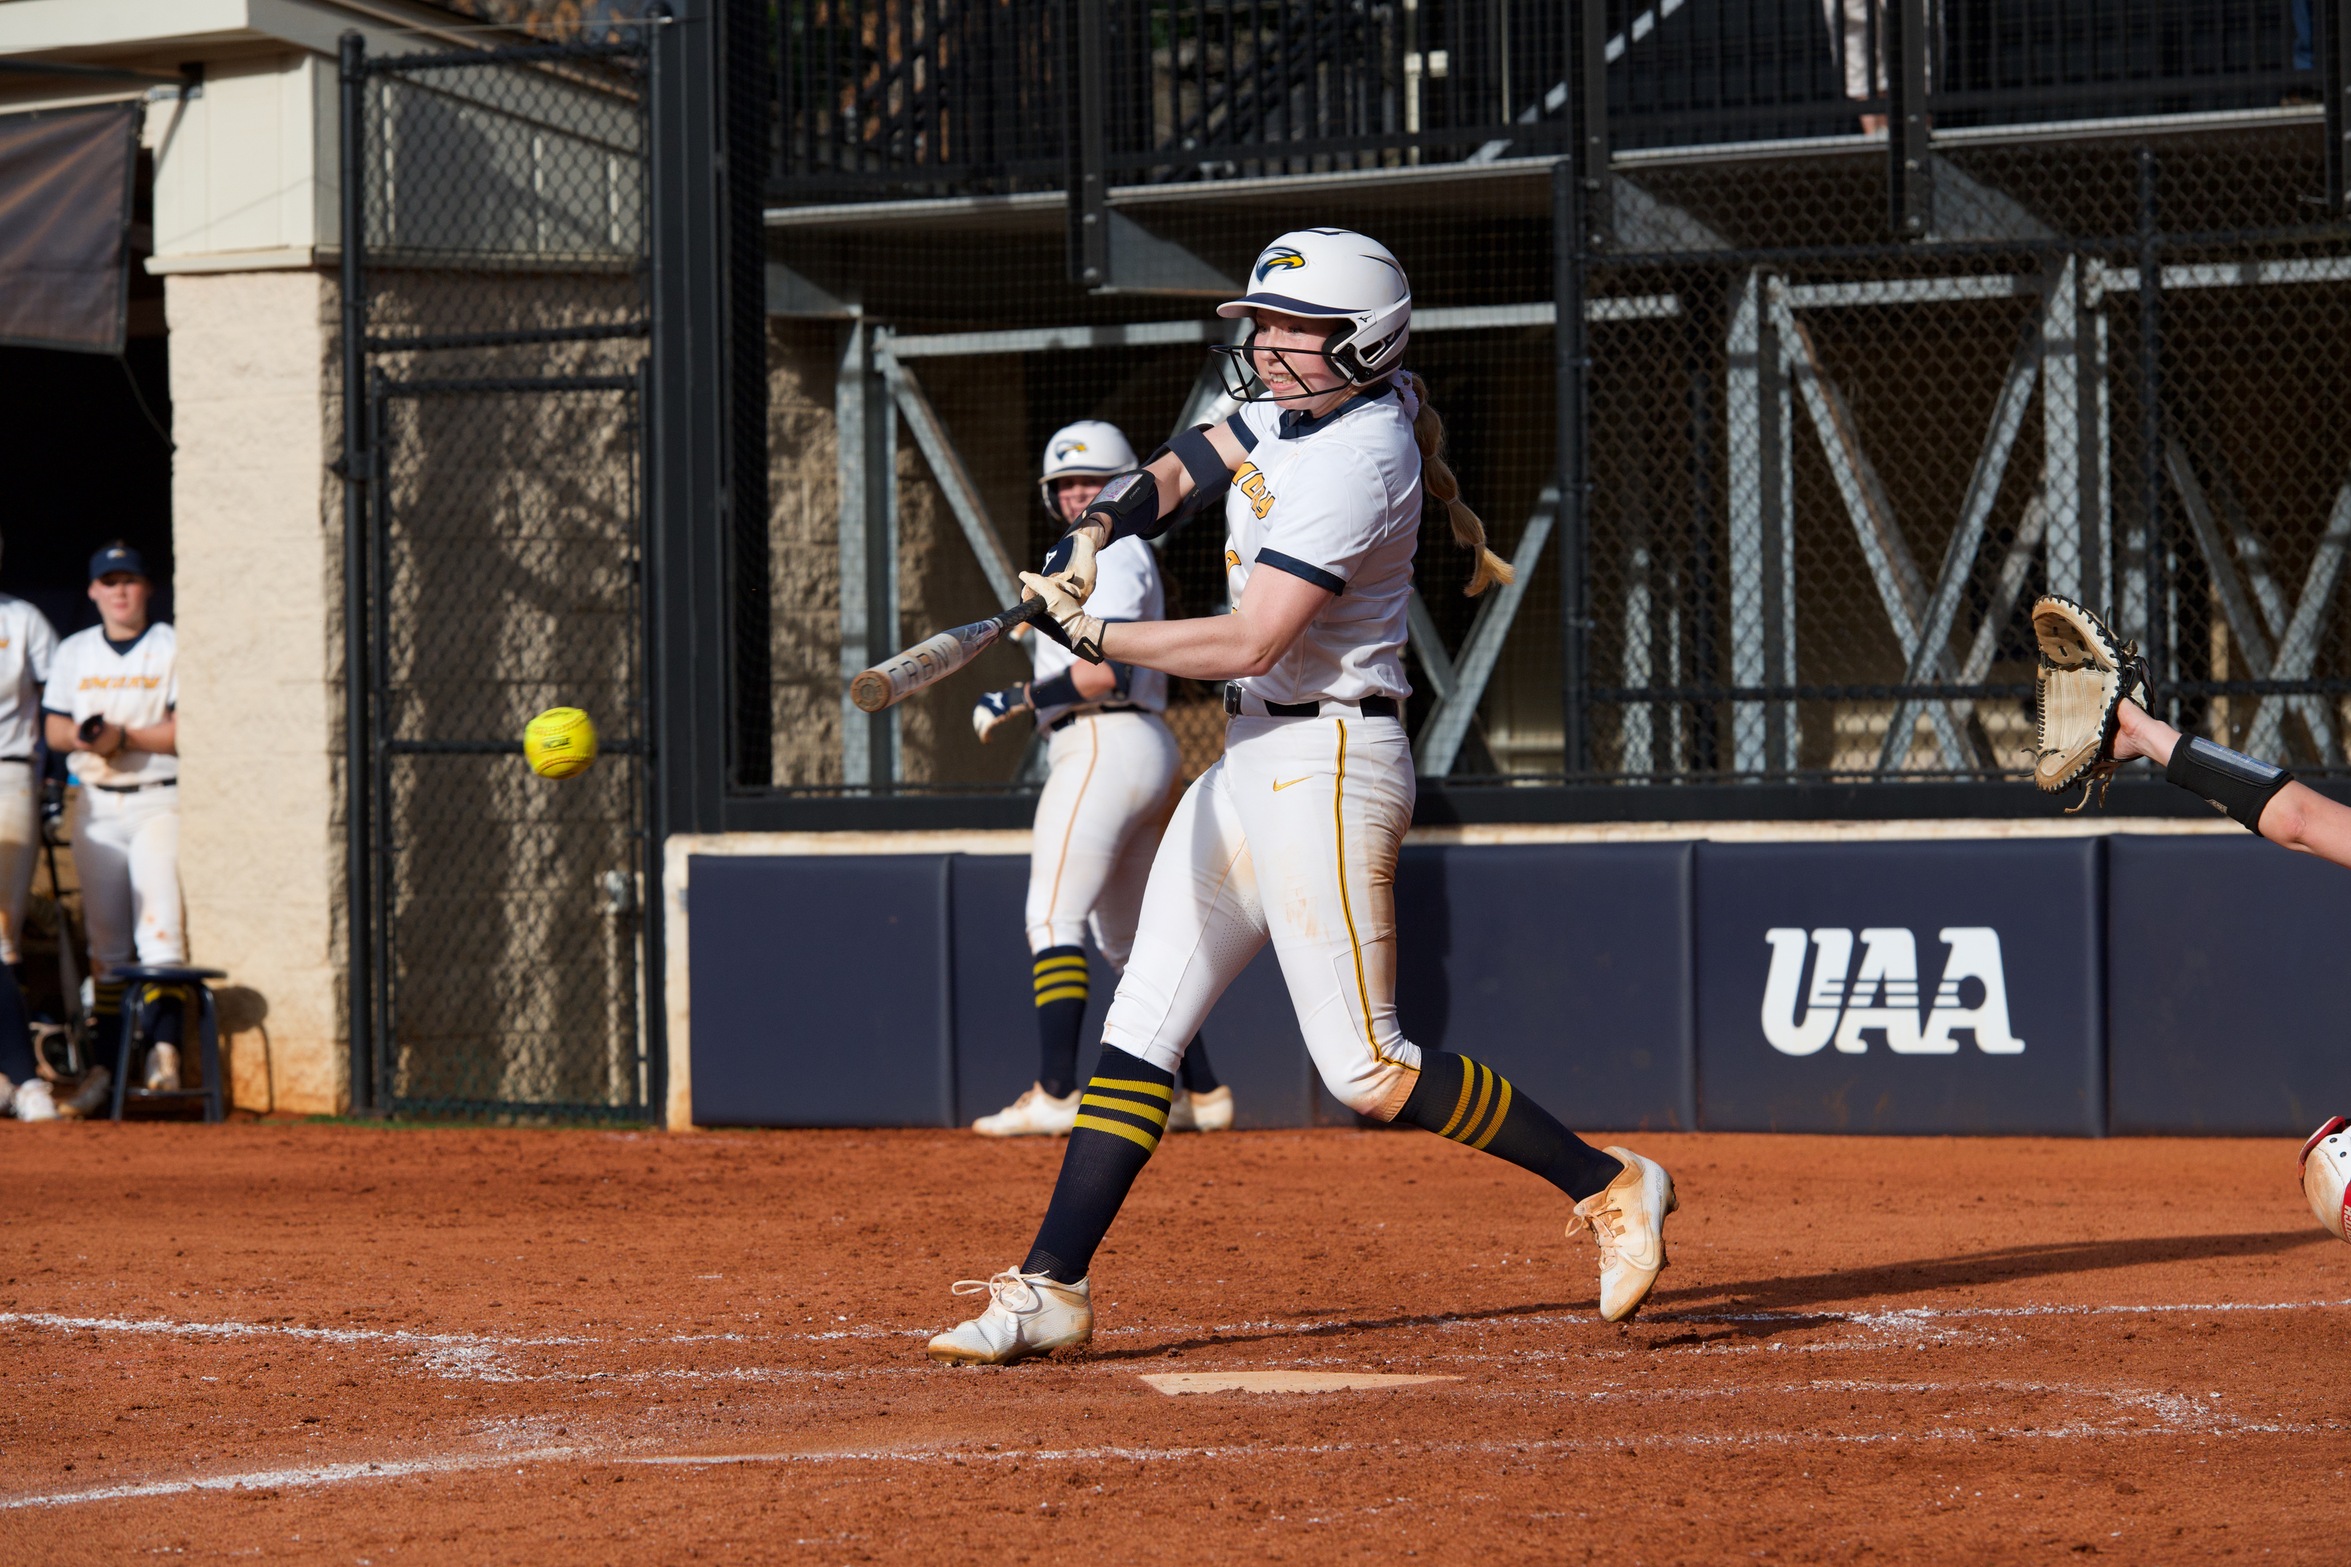 Softball Completes Comeback Against Spalding, Opens Series with 7-4 Win